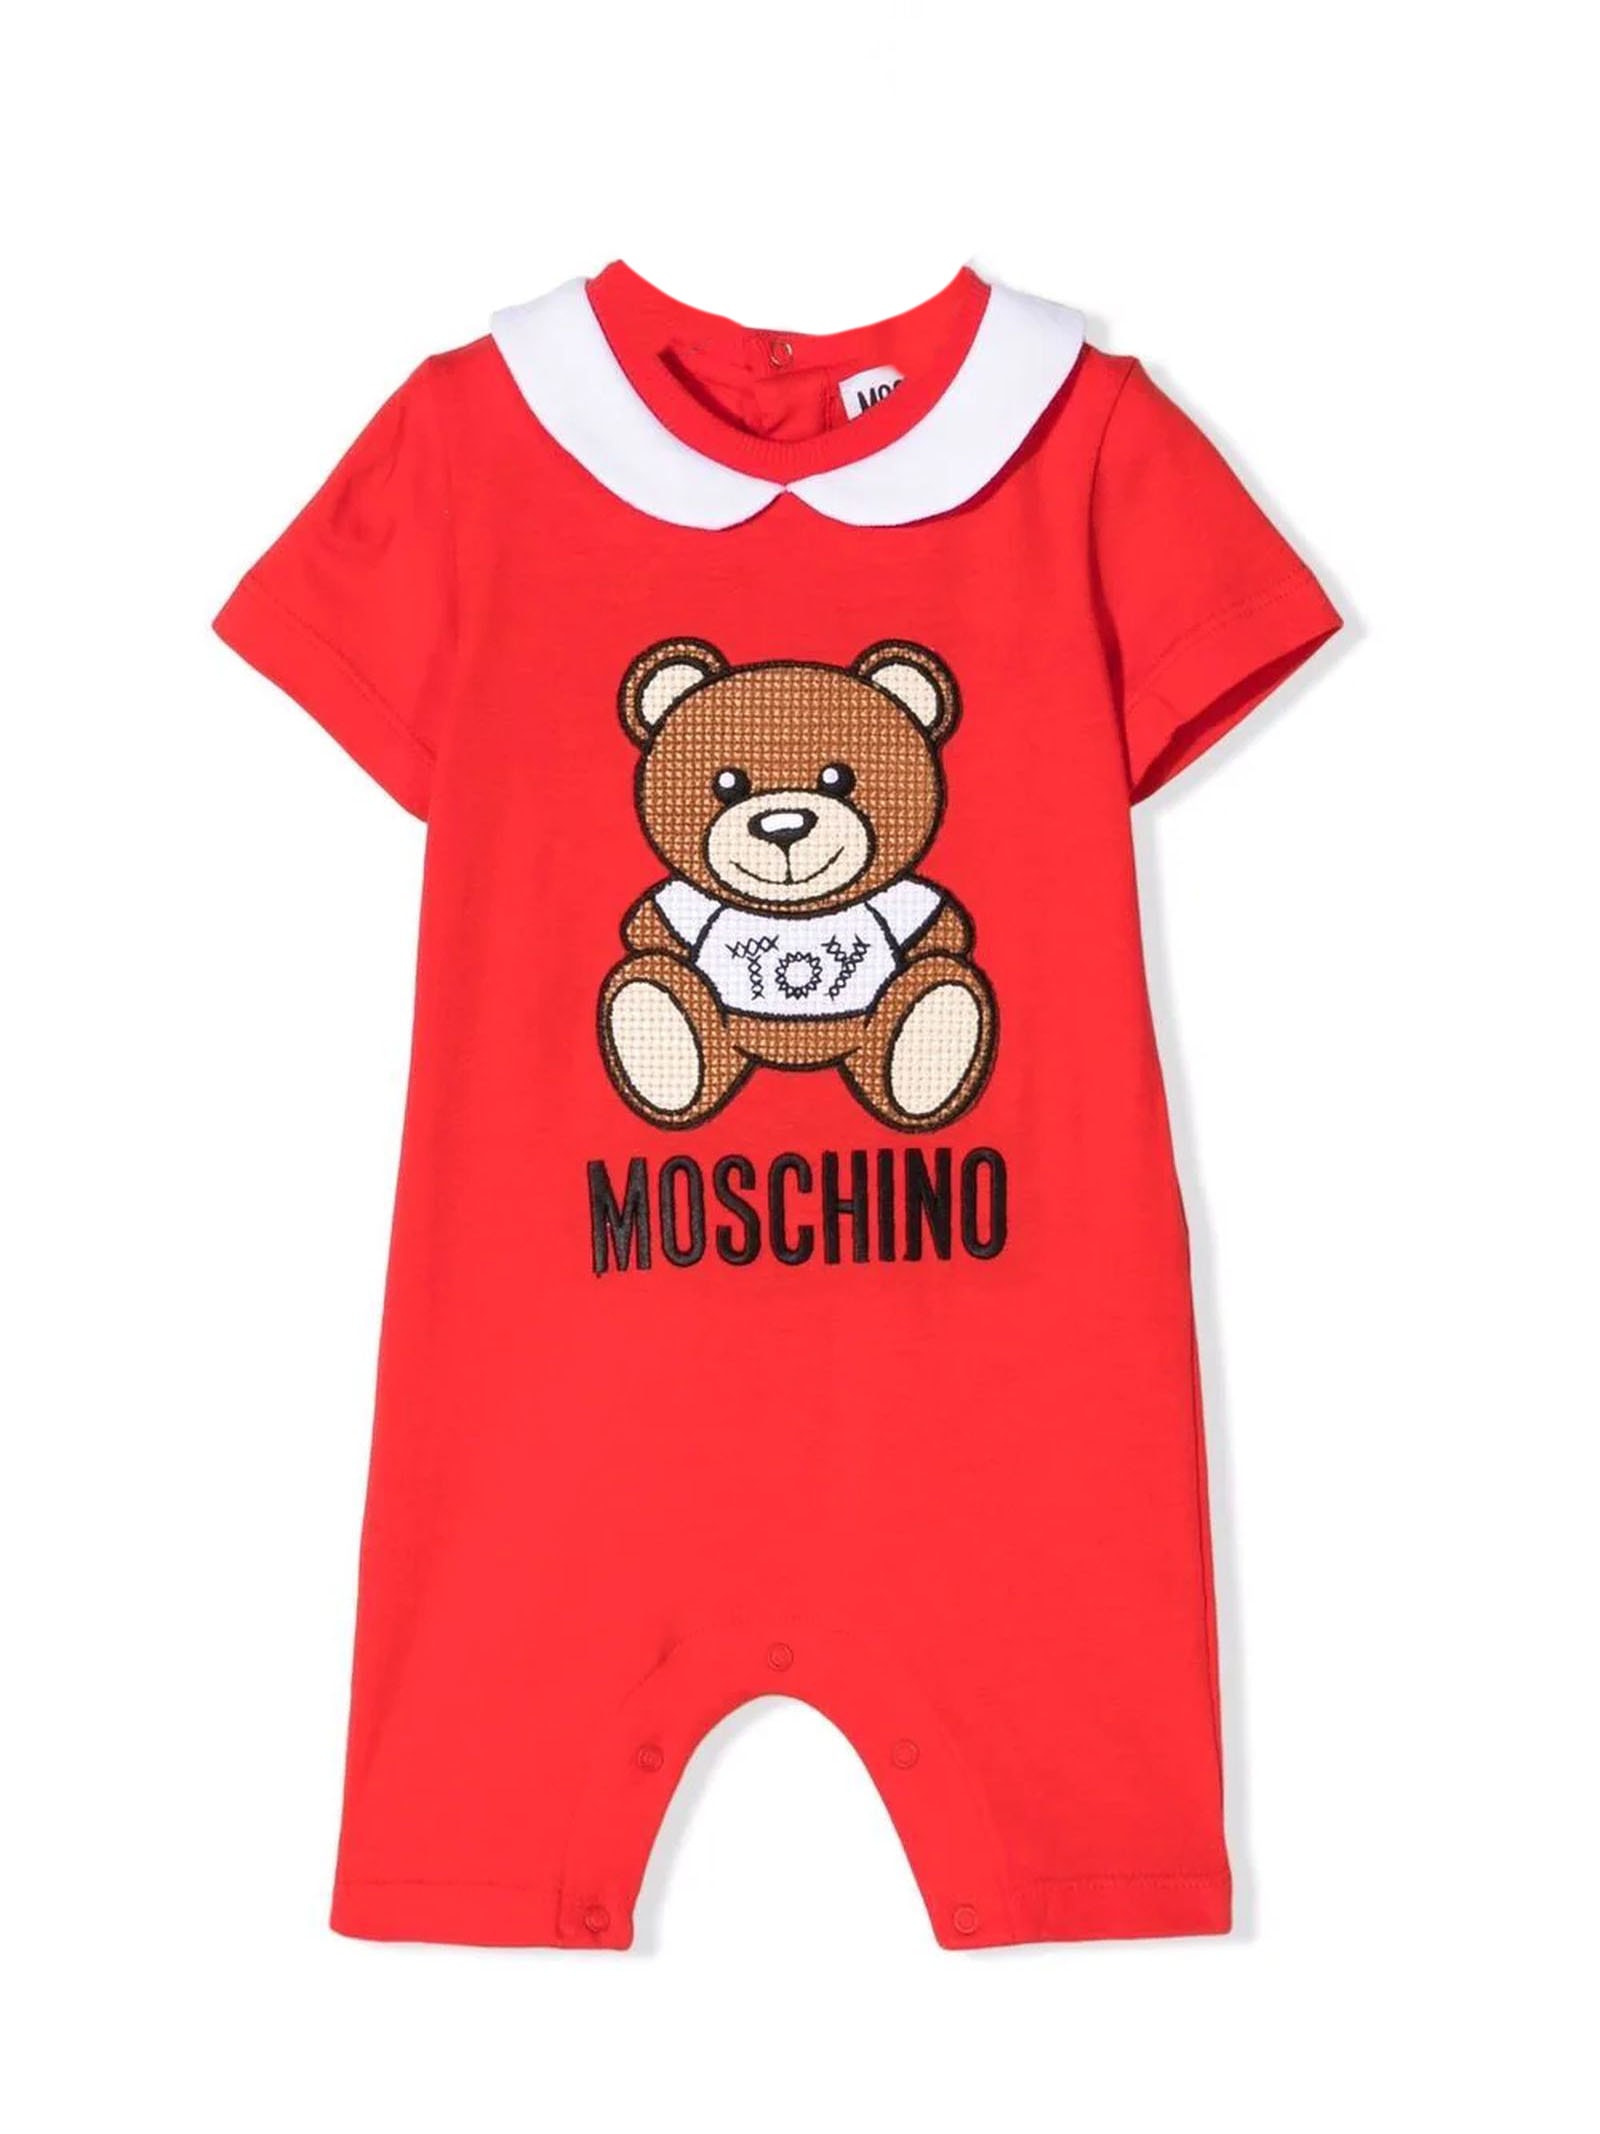 Moschino Red Polyester Romper